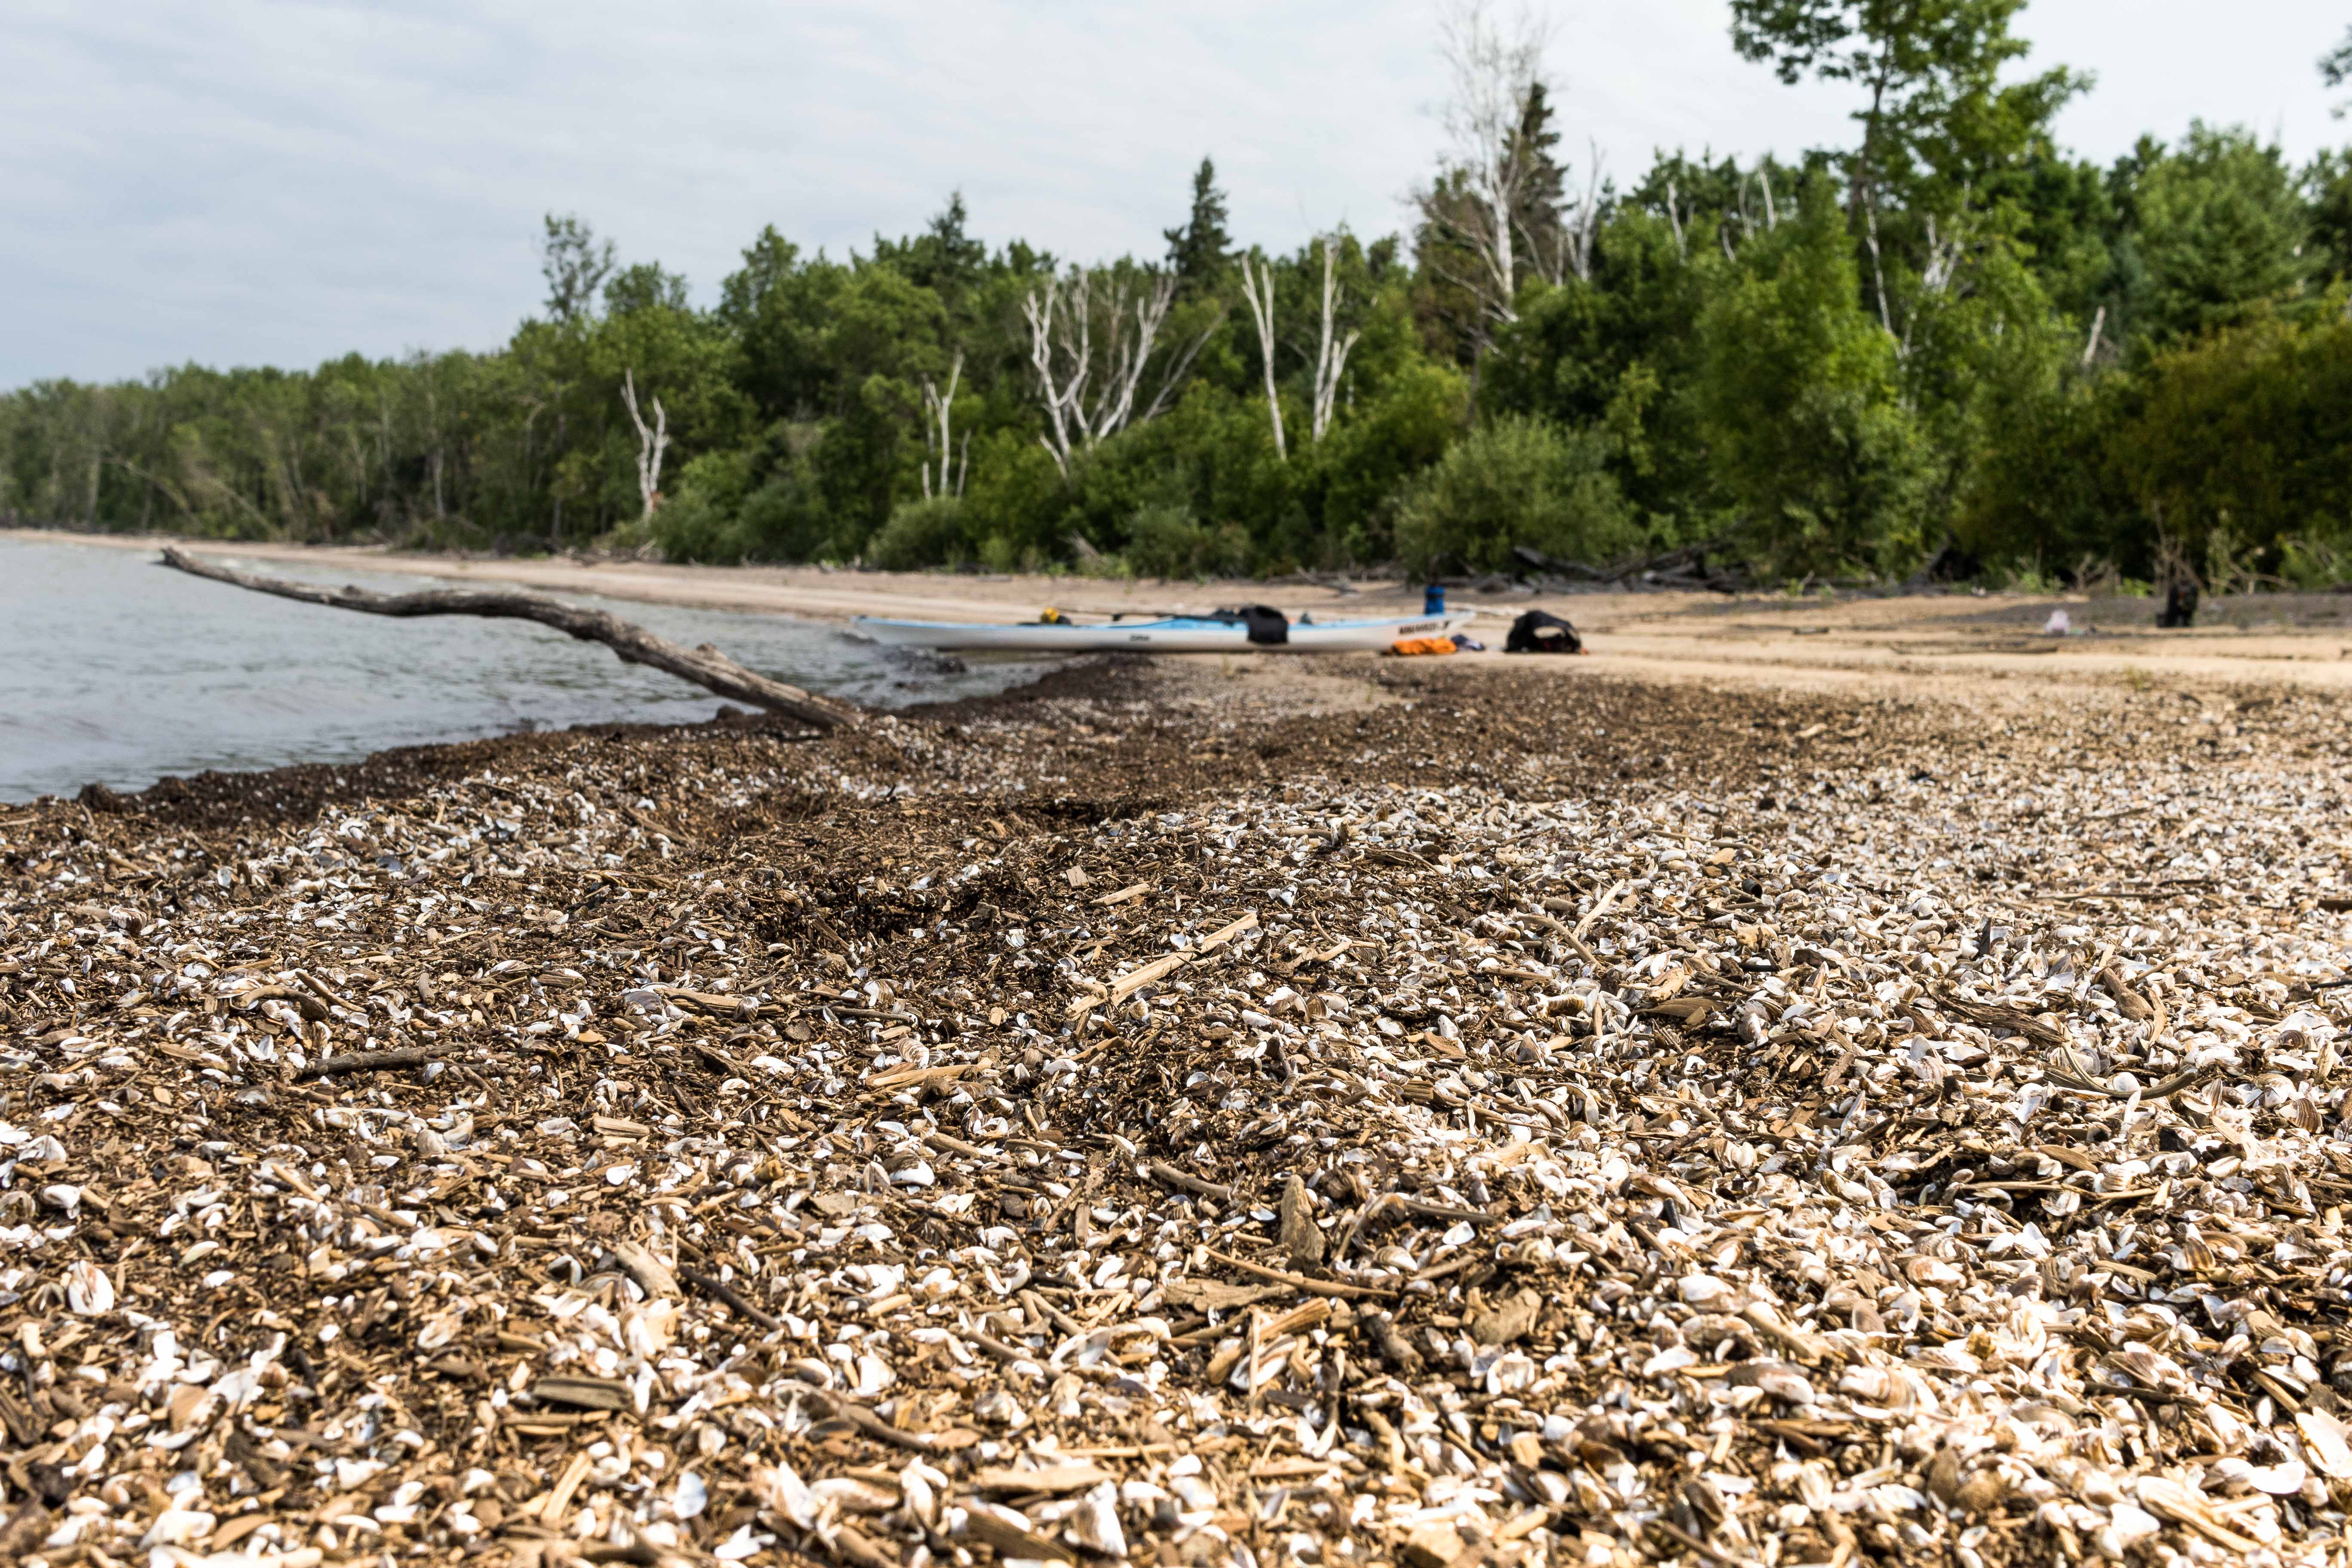 Zebra mussels have exploded in numbers in recent years. This beach is covered in the washed up shells of dead mussels. Proactive beach cleaning has made sights like this rare in cottage country, but on the remote sections of the lake, the mussels are easily visible by the millions.